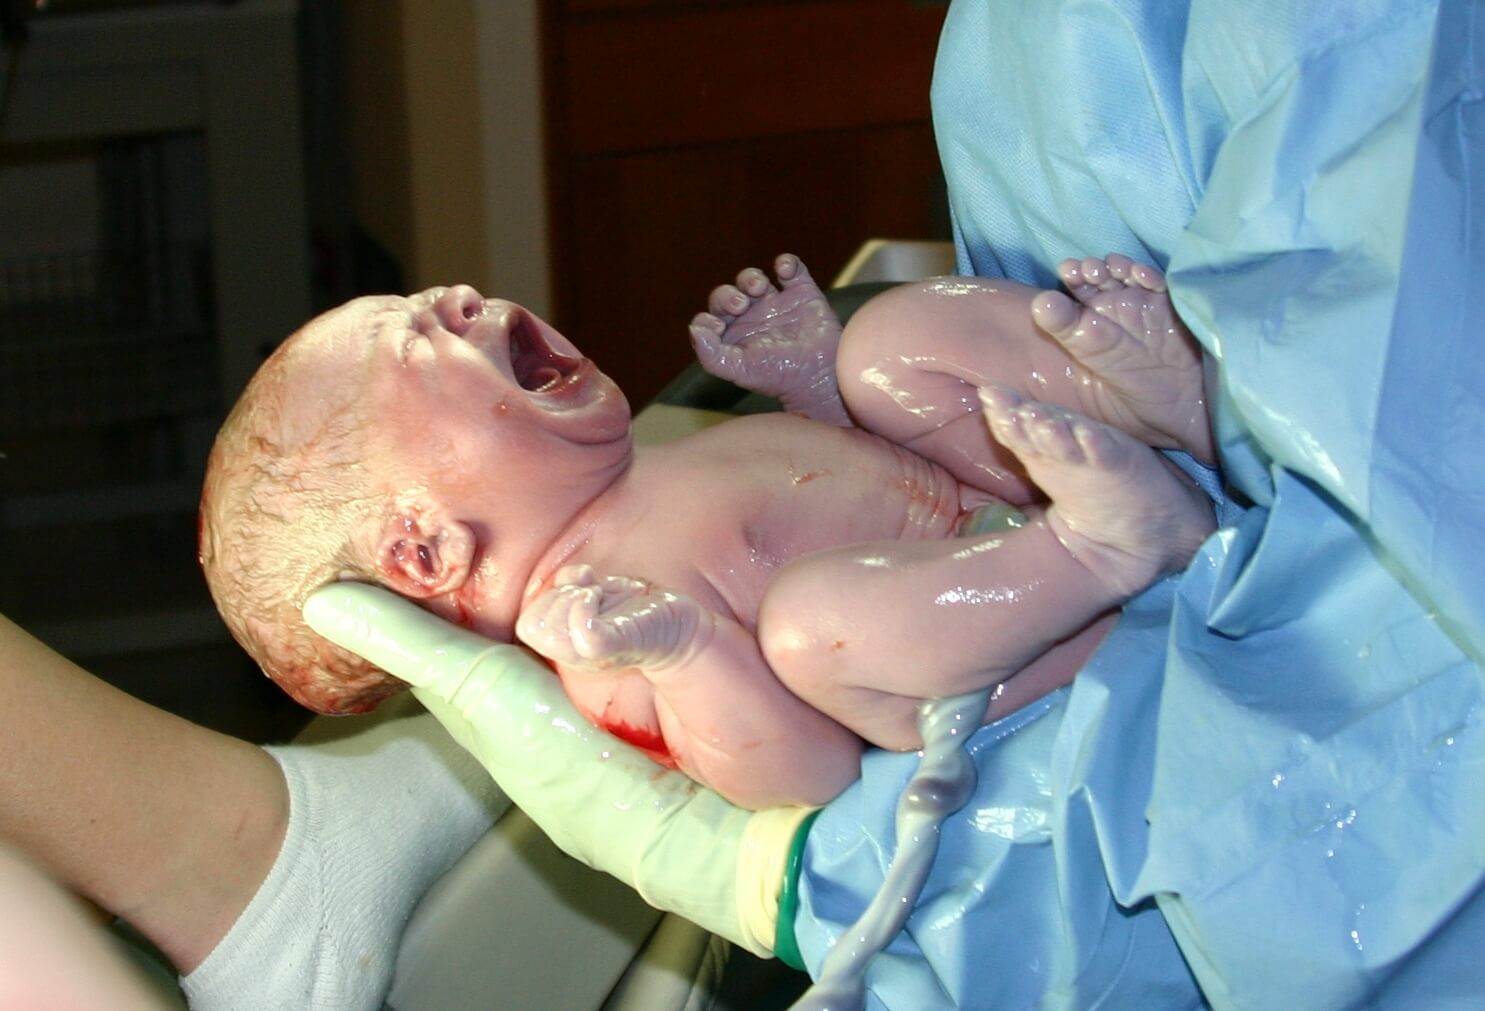 Are you familiar with the 9 different types of childbirth?